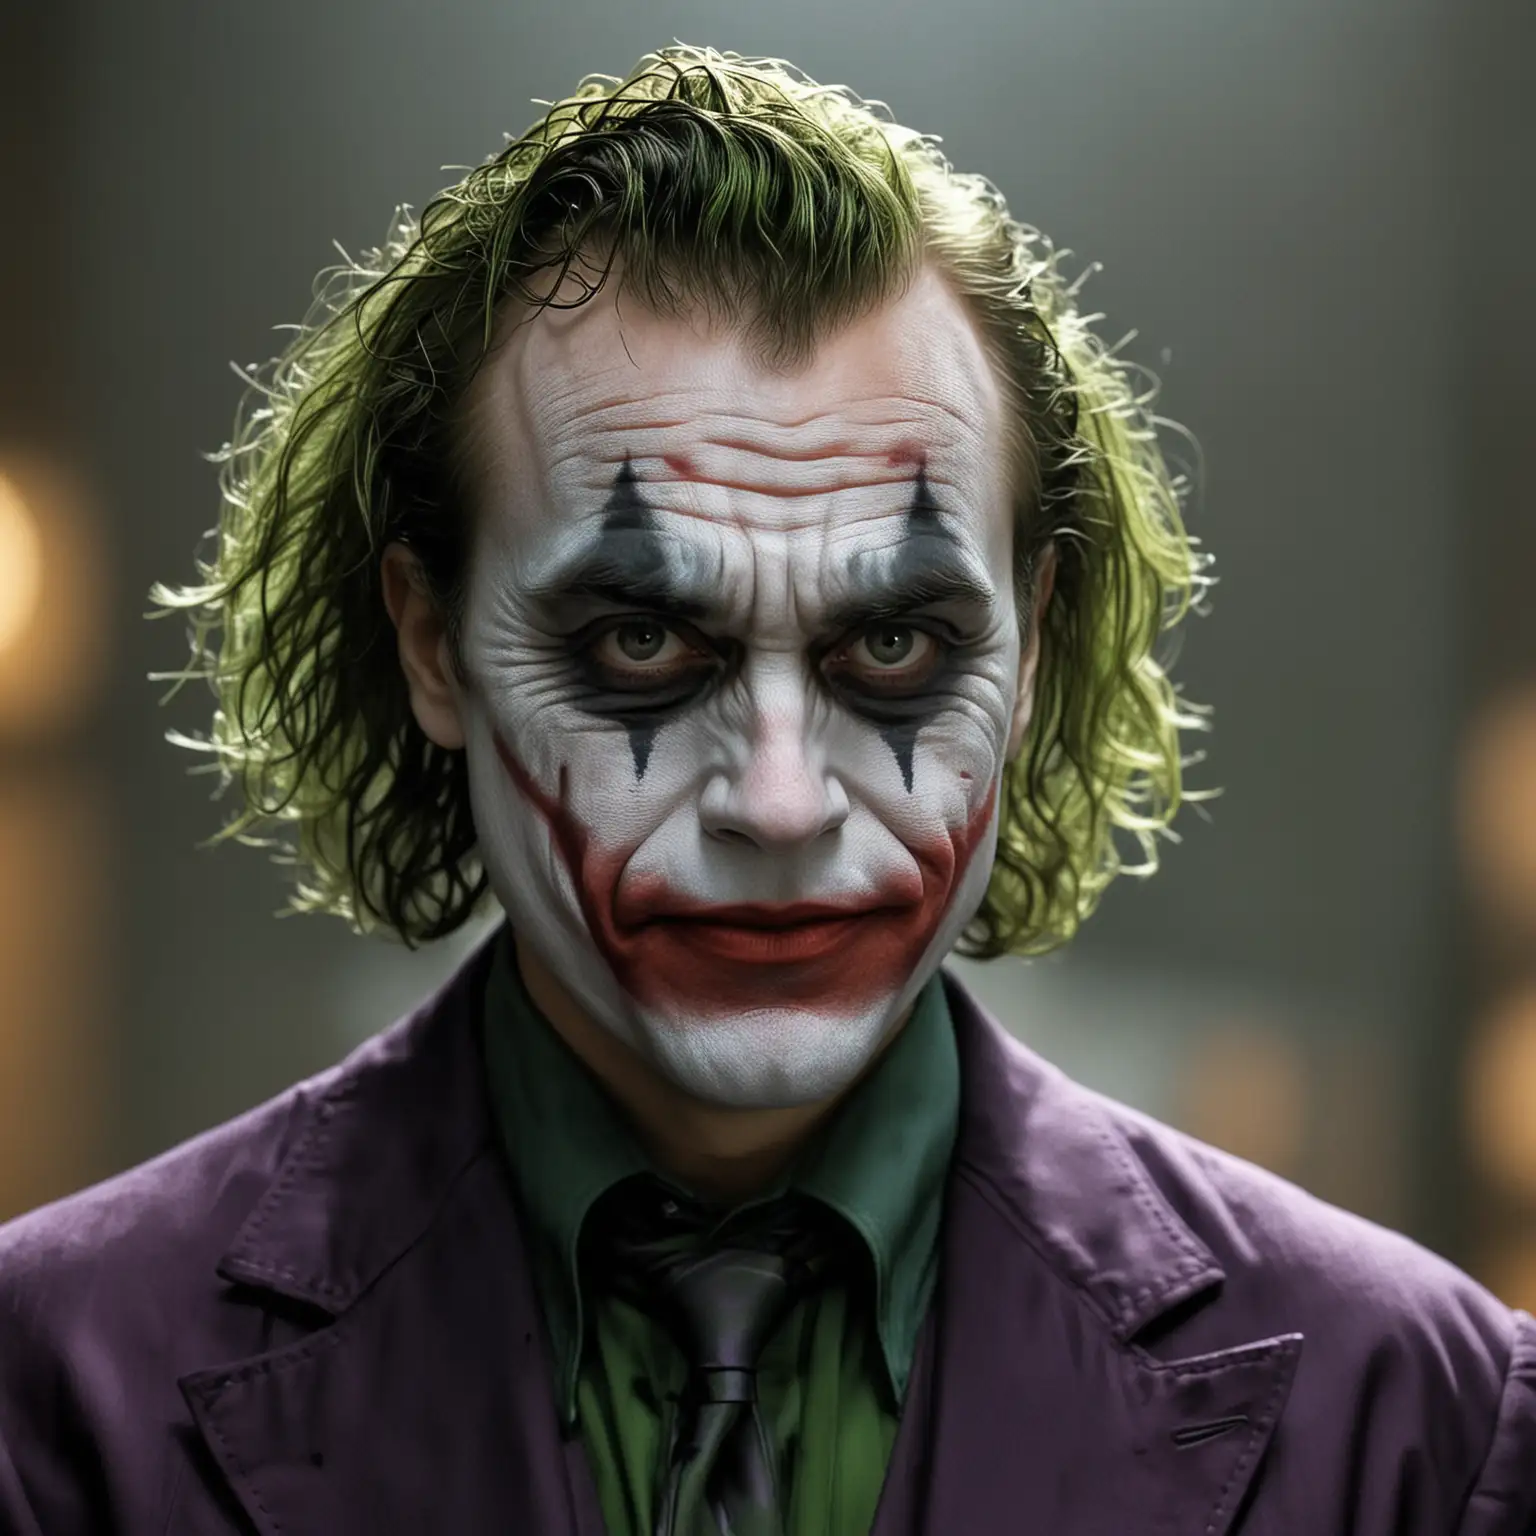 Sinister Joker with Iconic Why So Serious Phrase